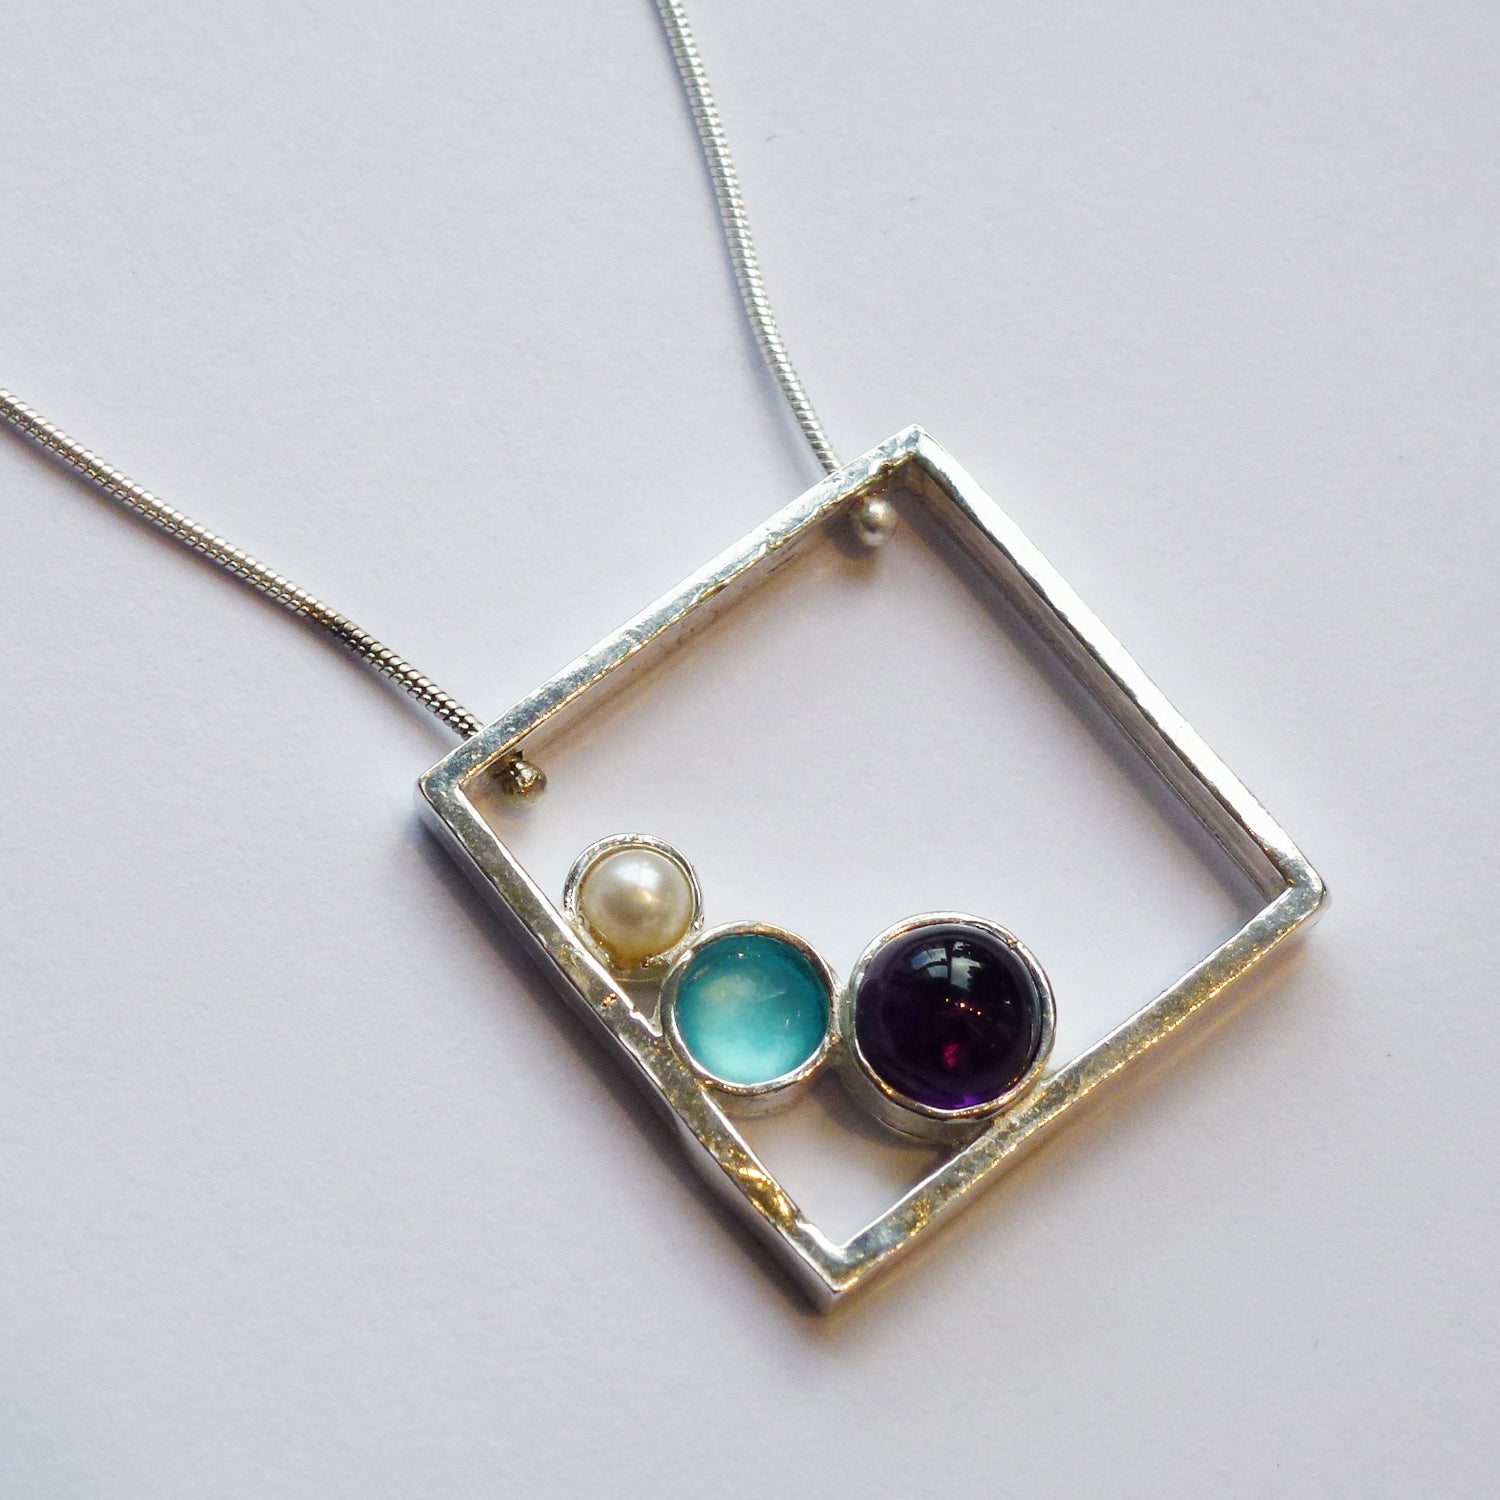 Yair Stern - Square Necklace with 3 Stones